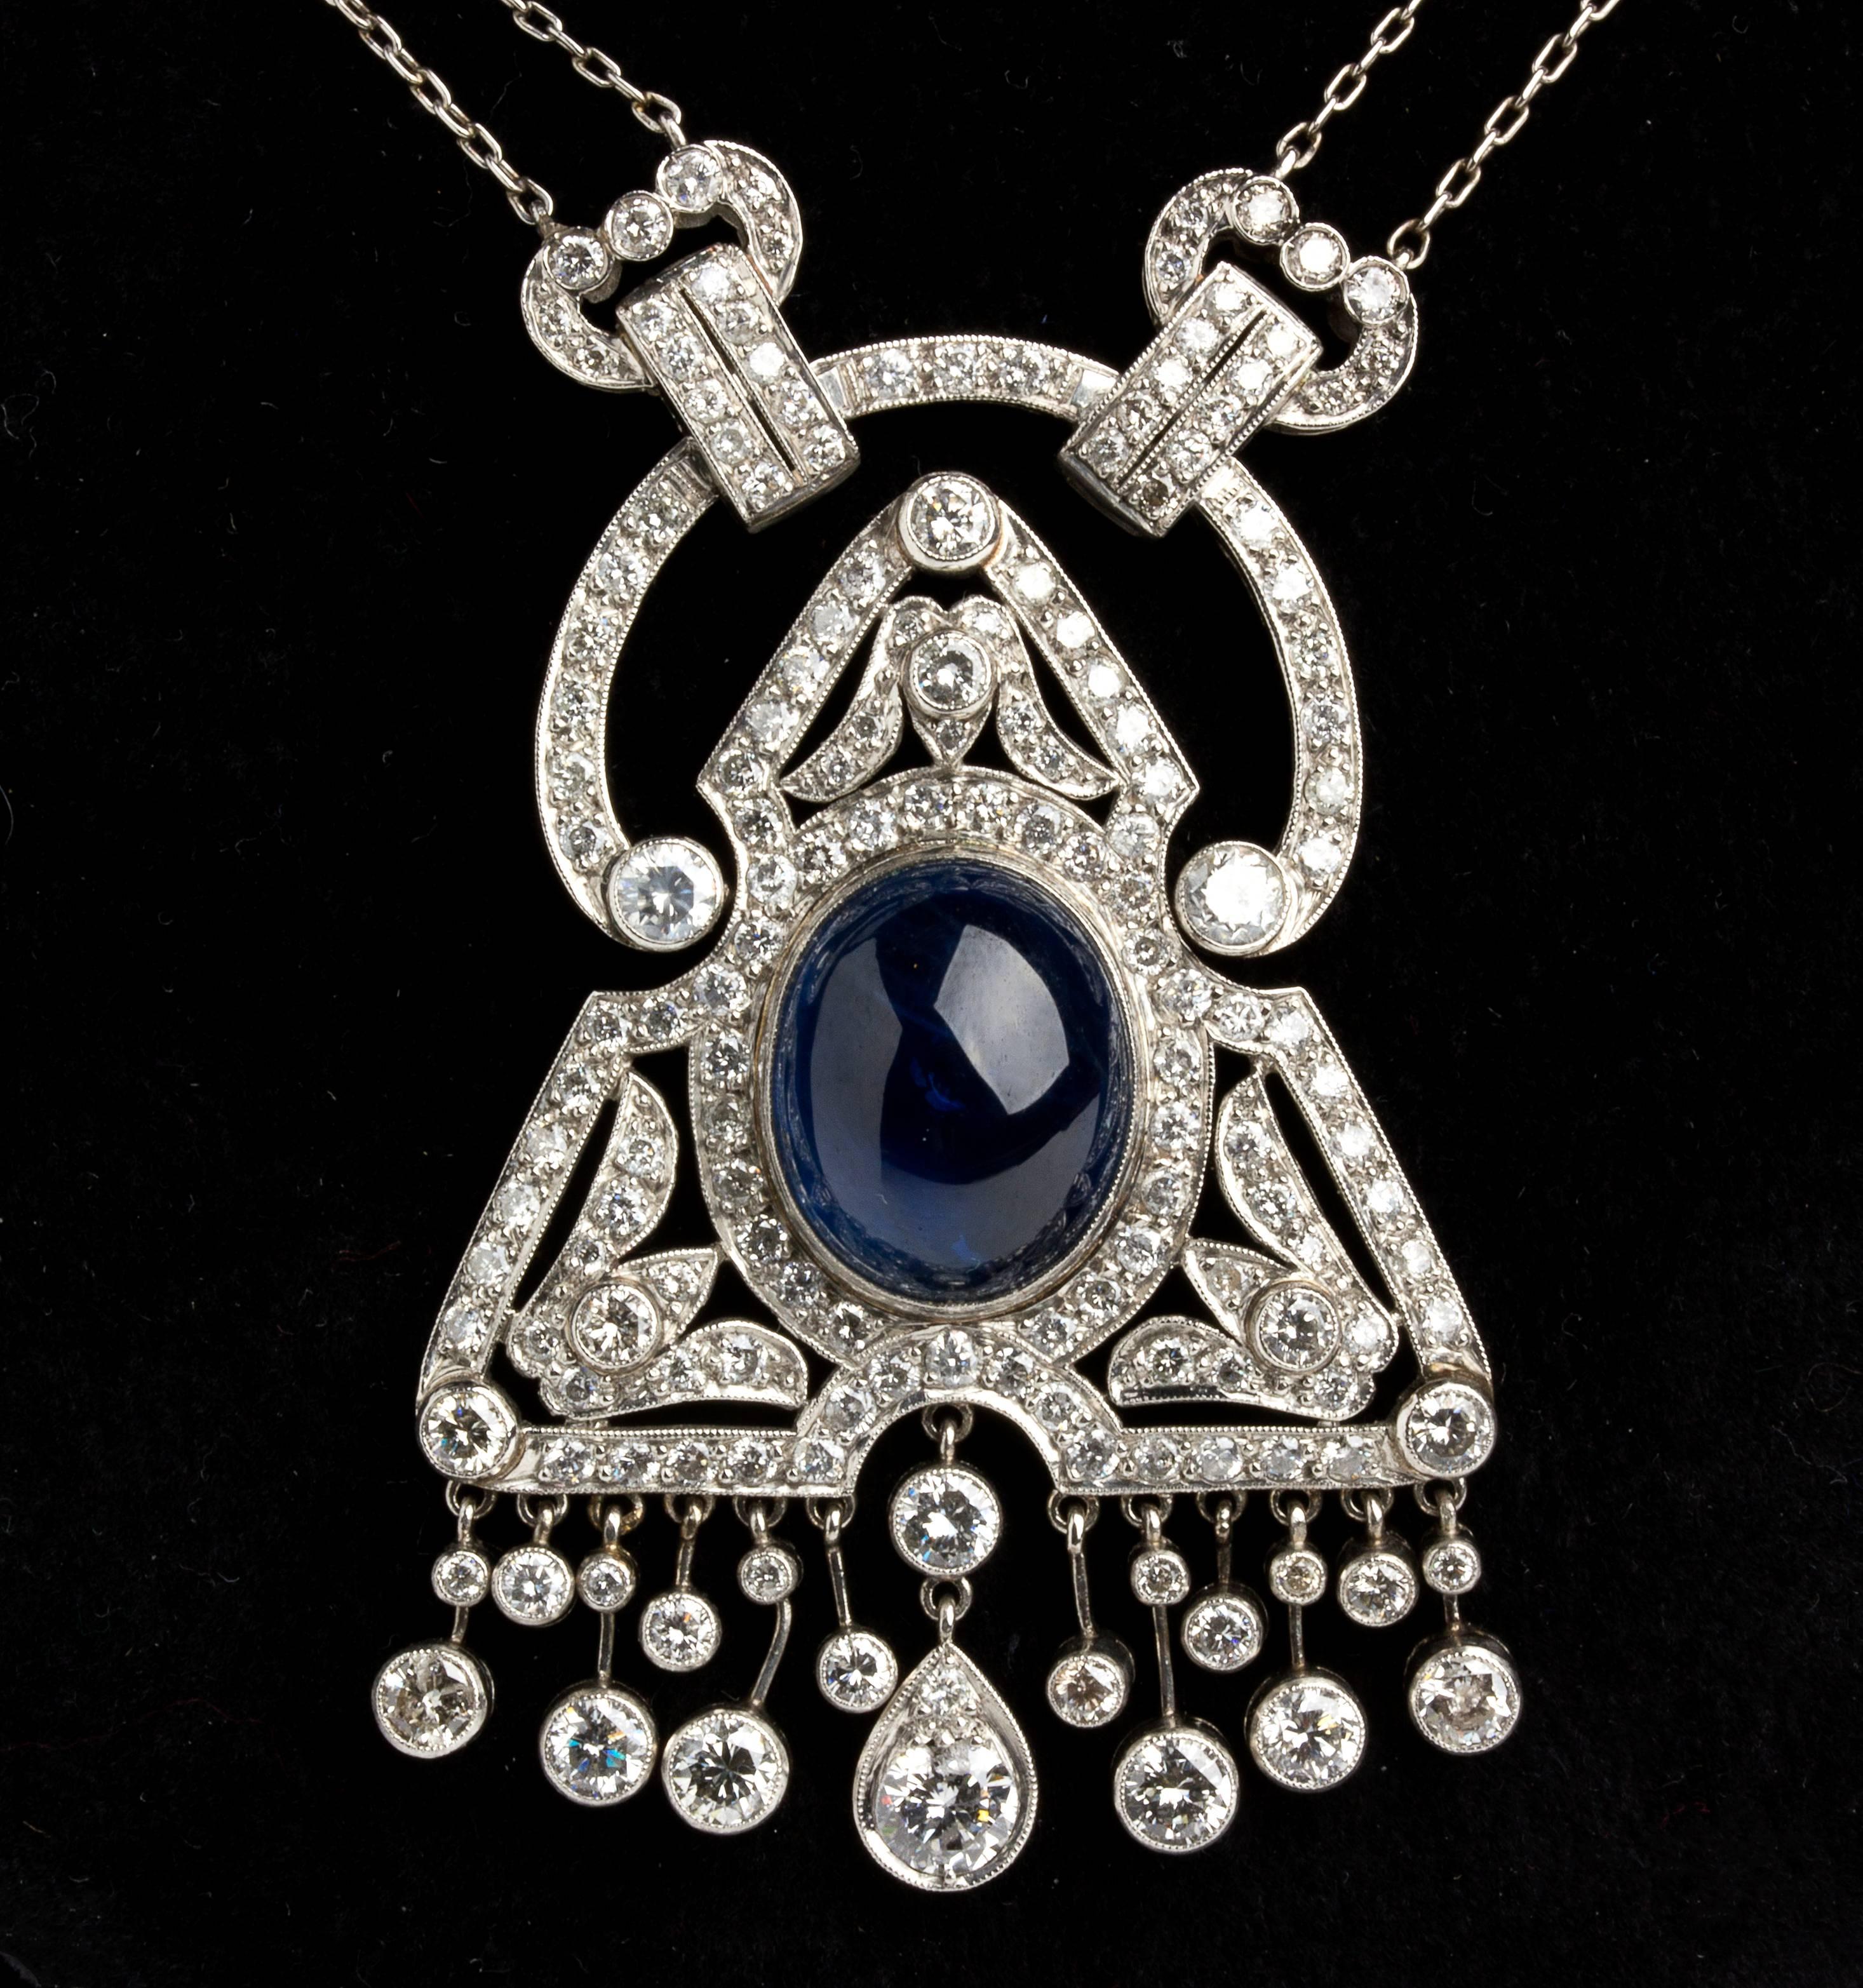 Finely shaped with geometric motif embellished with diamond weighing 5.00 ct, SI clarity, H/I color, centered by cabochon cut sapphire weighing 8.00 ct. Total lenght 400 mm (15 3⁄4 in), pendant dimension 48 x 33 mm (1 57⁄64 x 1 19⁄64 in). Weight